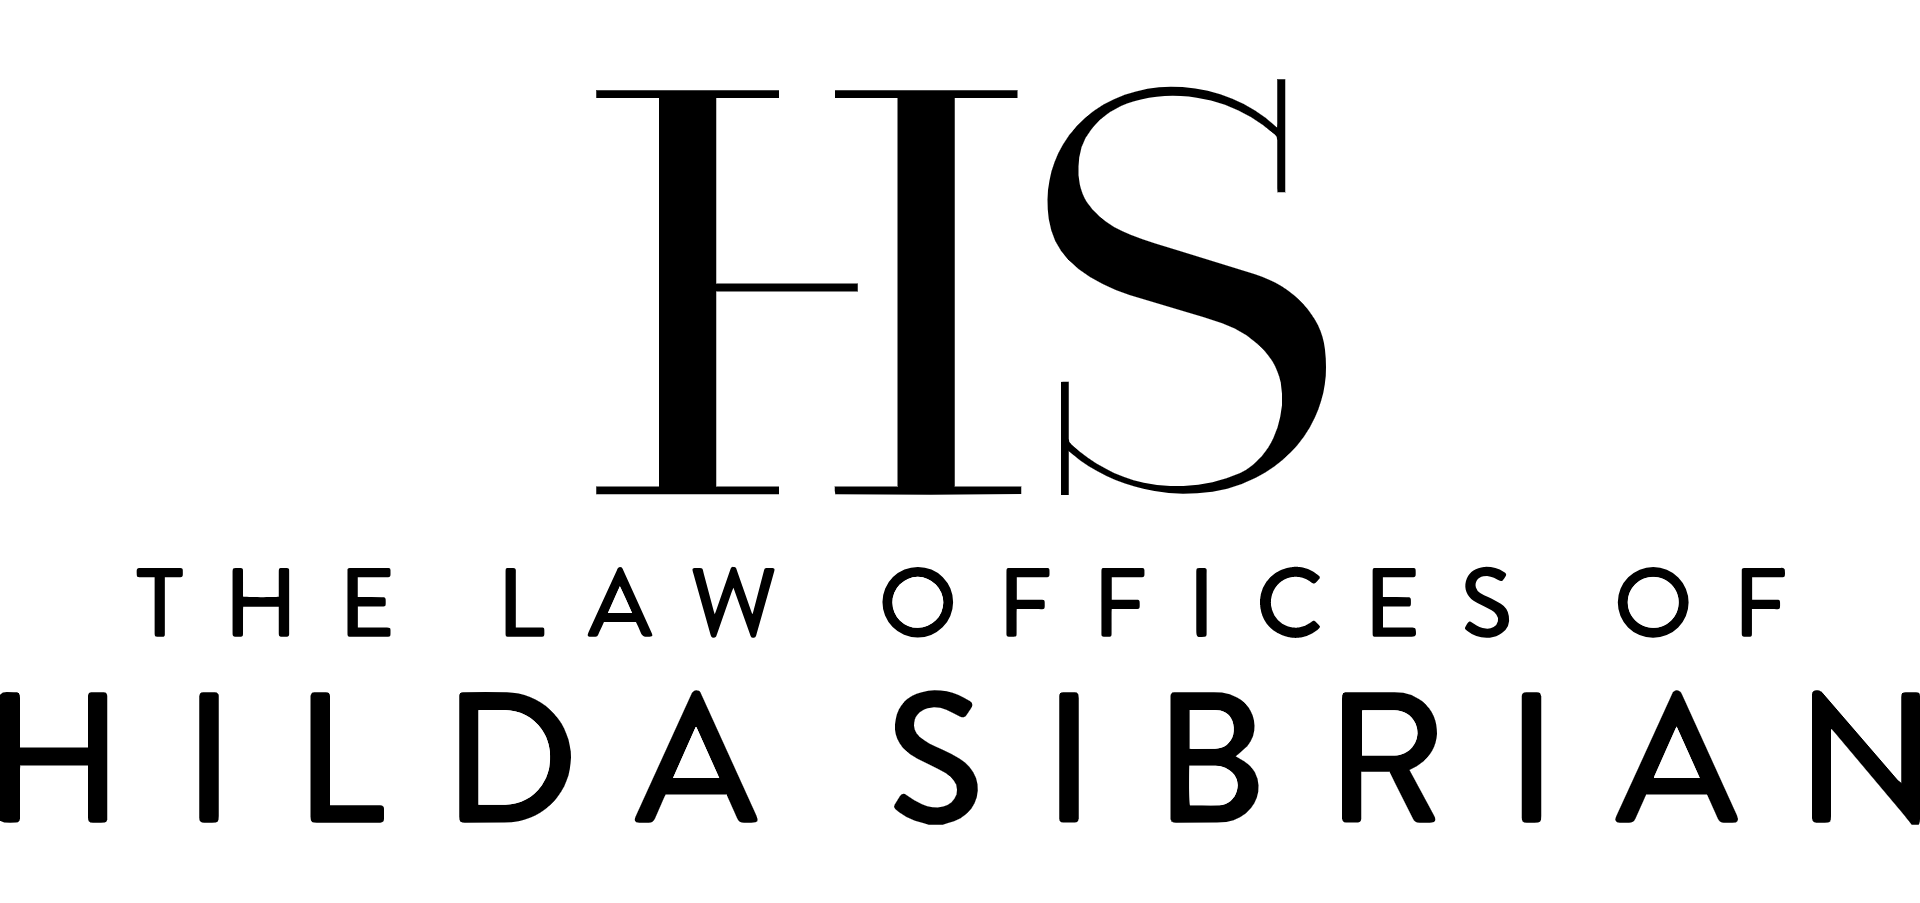 The Law Offices of Hilda Sibrian